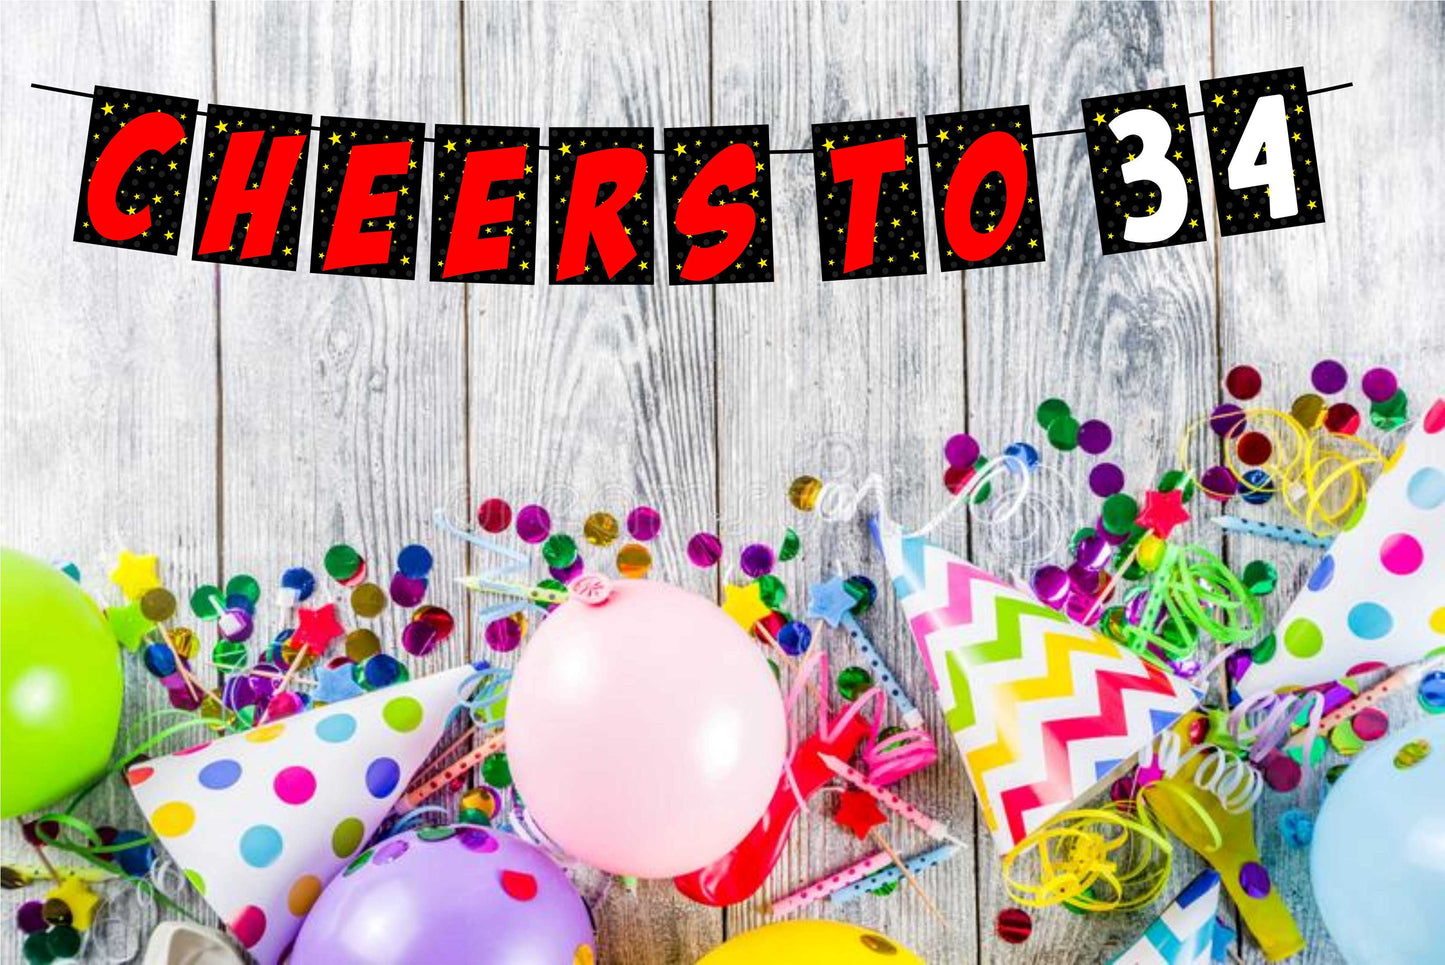 Cheers to 34 Birthday Banner for Photo Shoot Backdrop and Theme Party